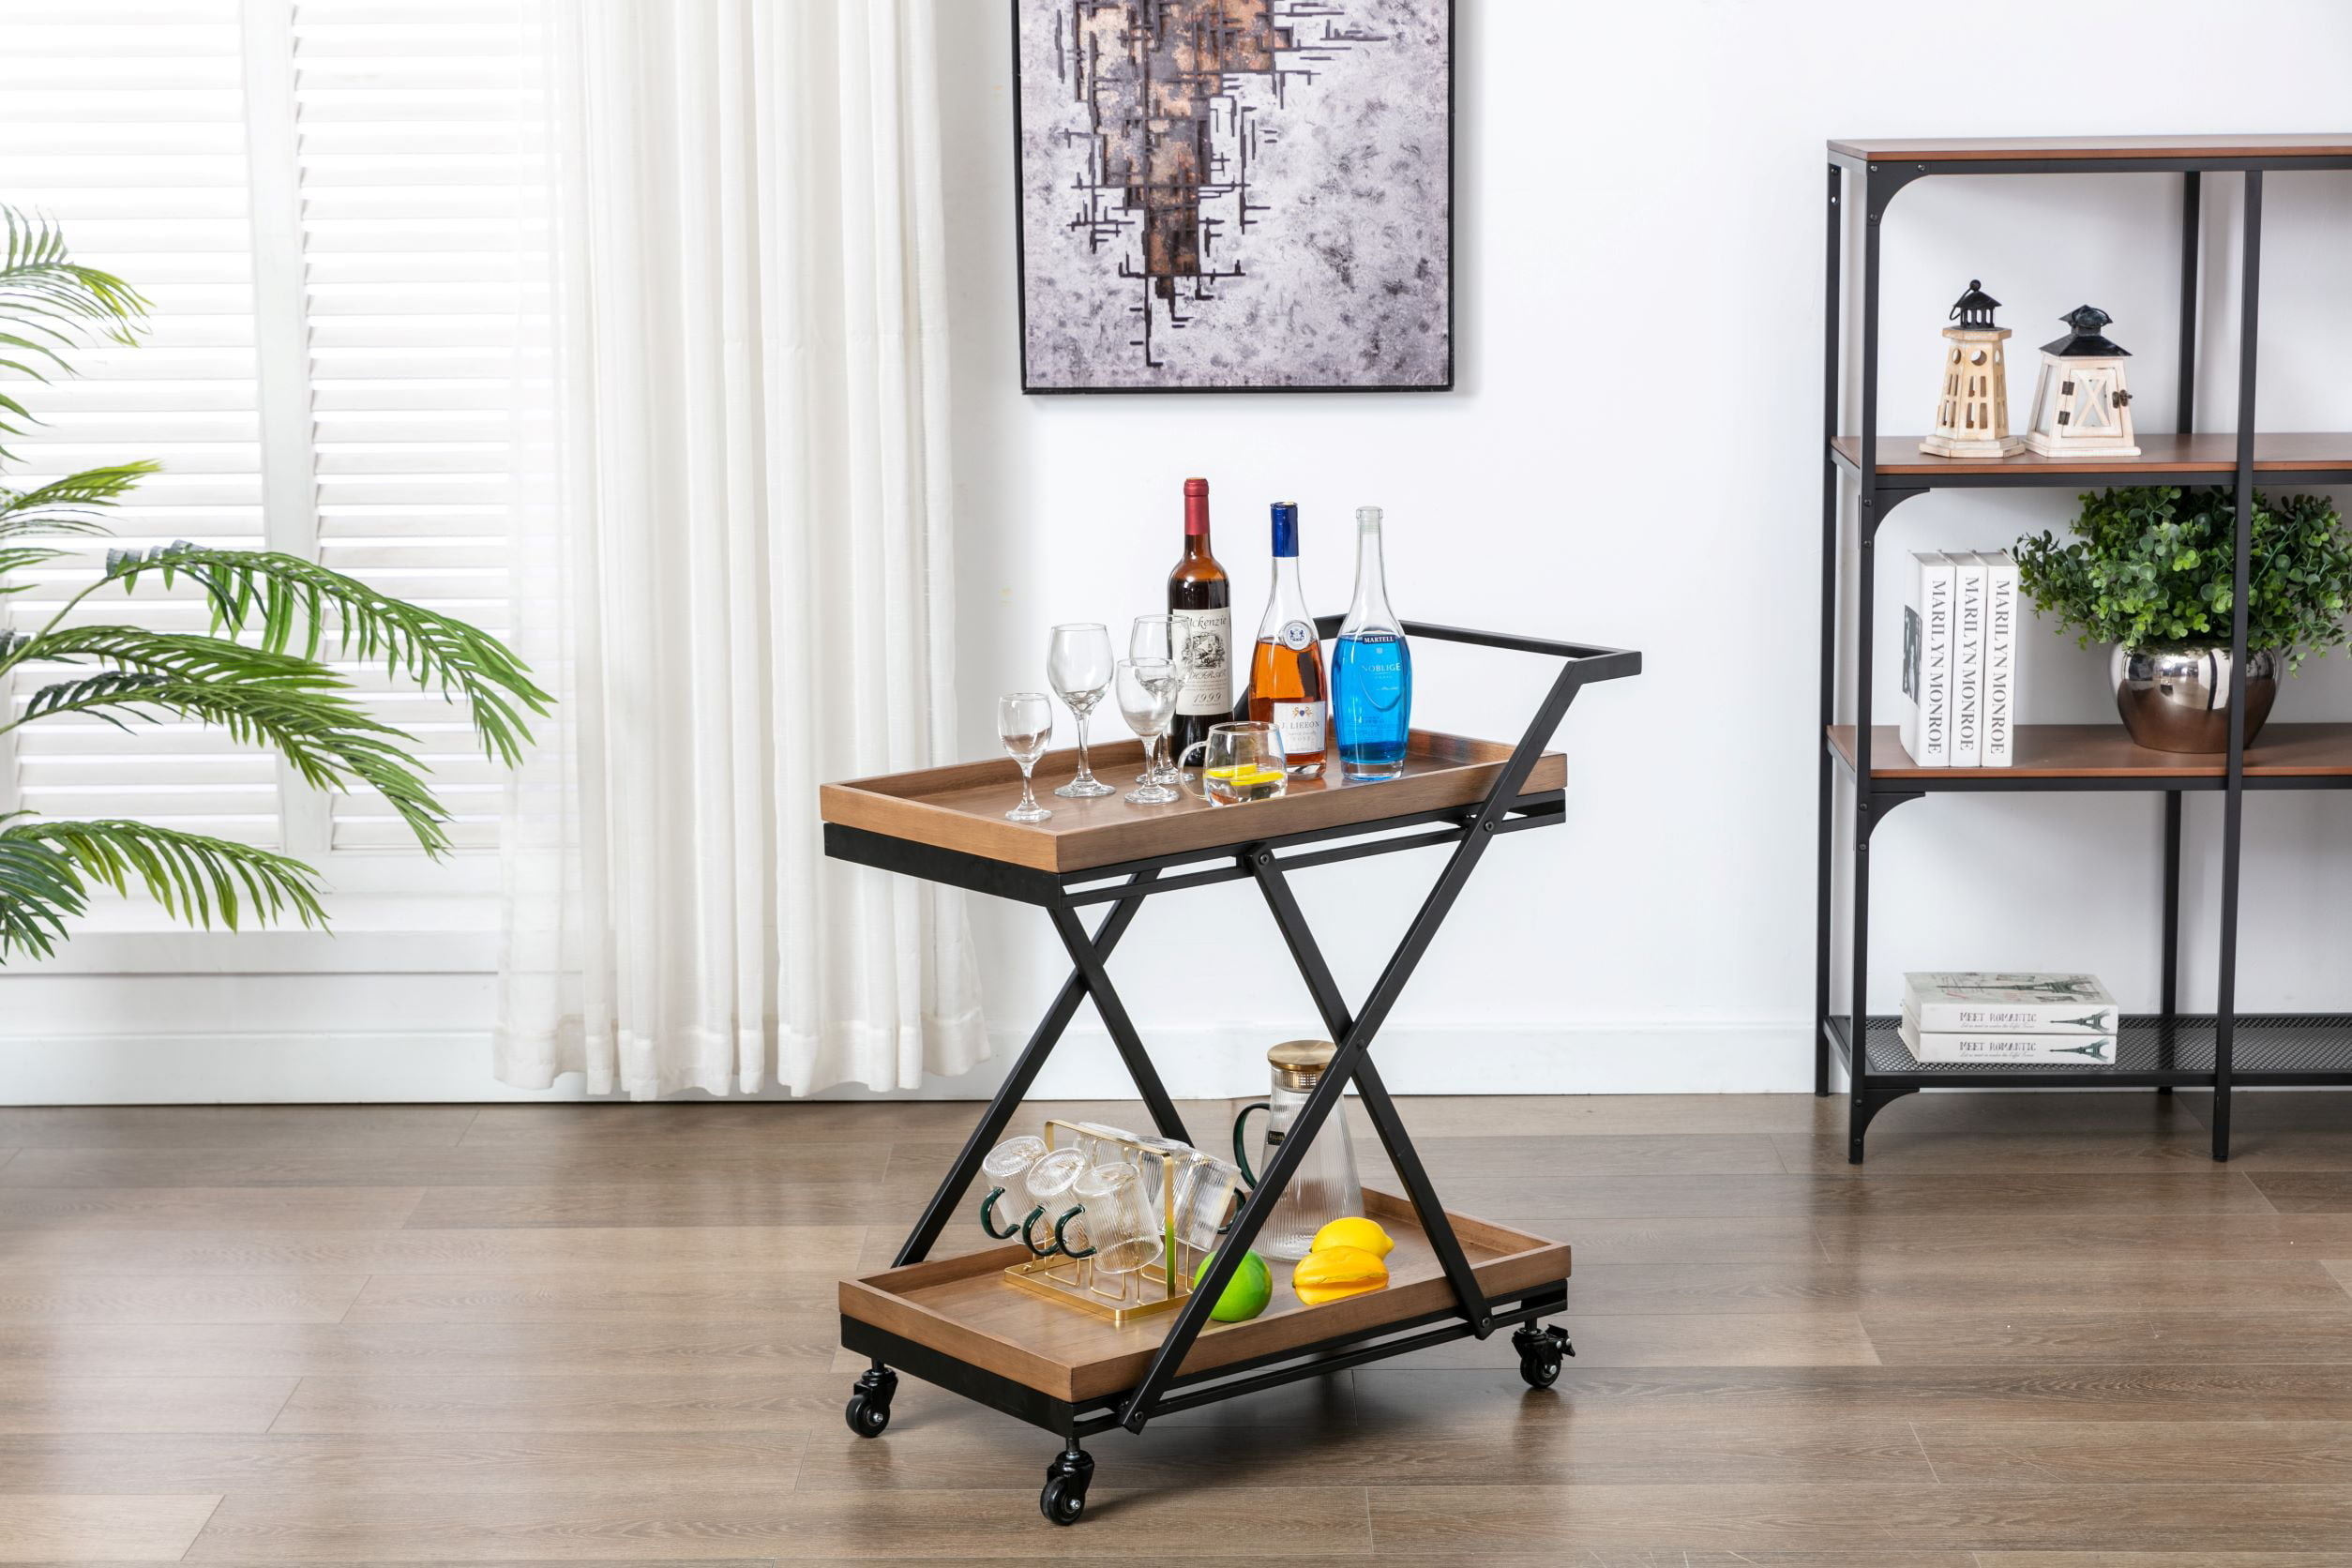 the bar cart with bottles and glasses on it